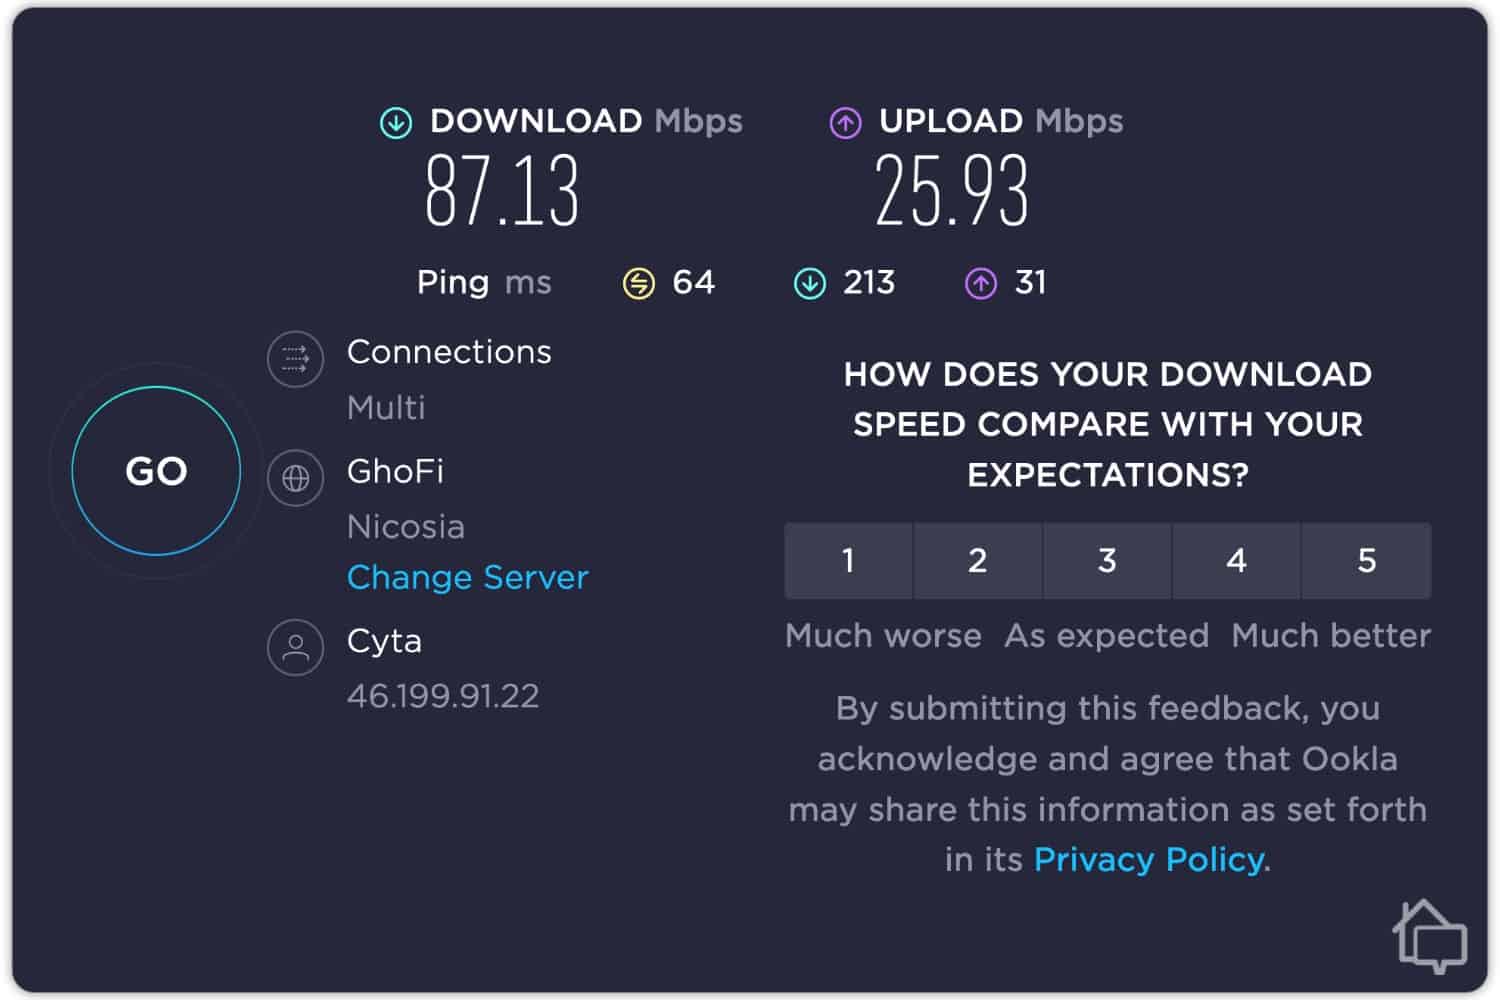 My 87 Mbps base speed over Wi-Fi was pretty decent.